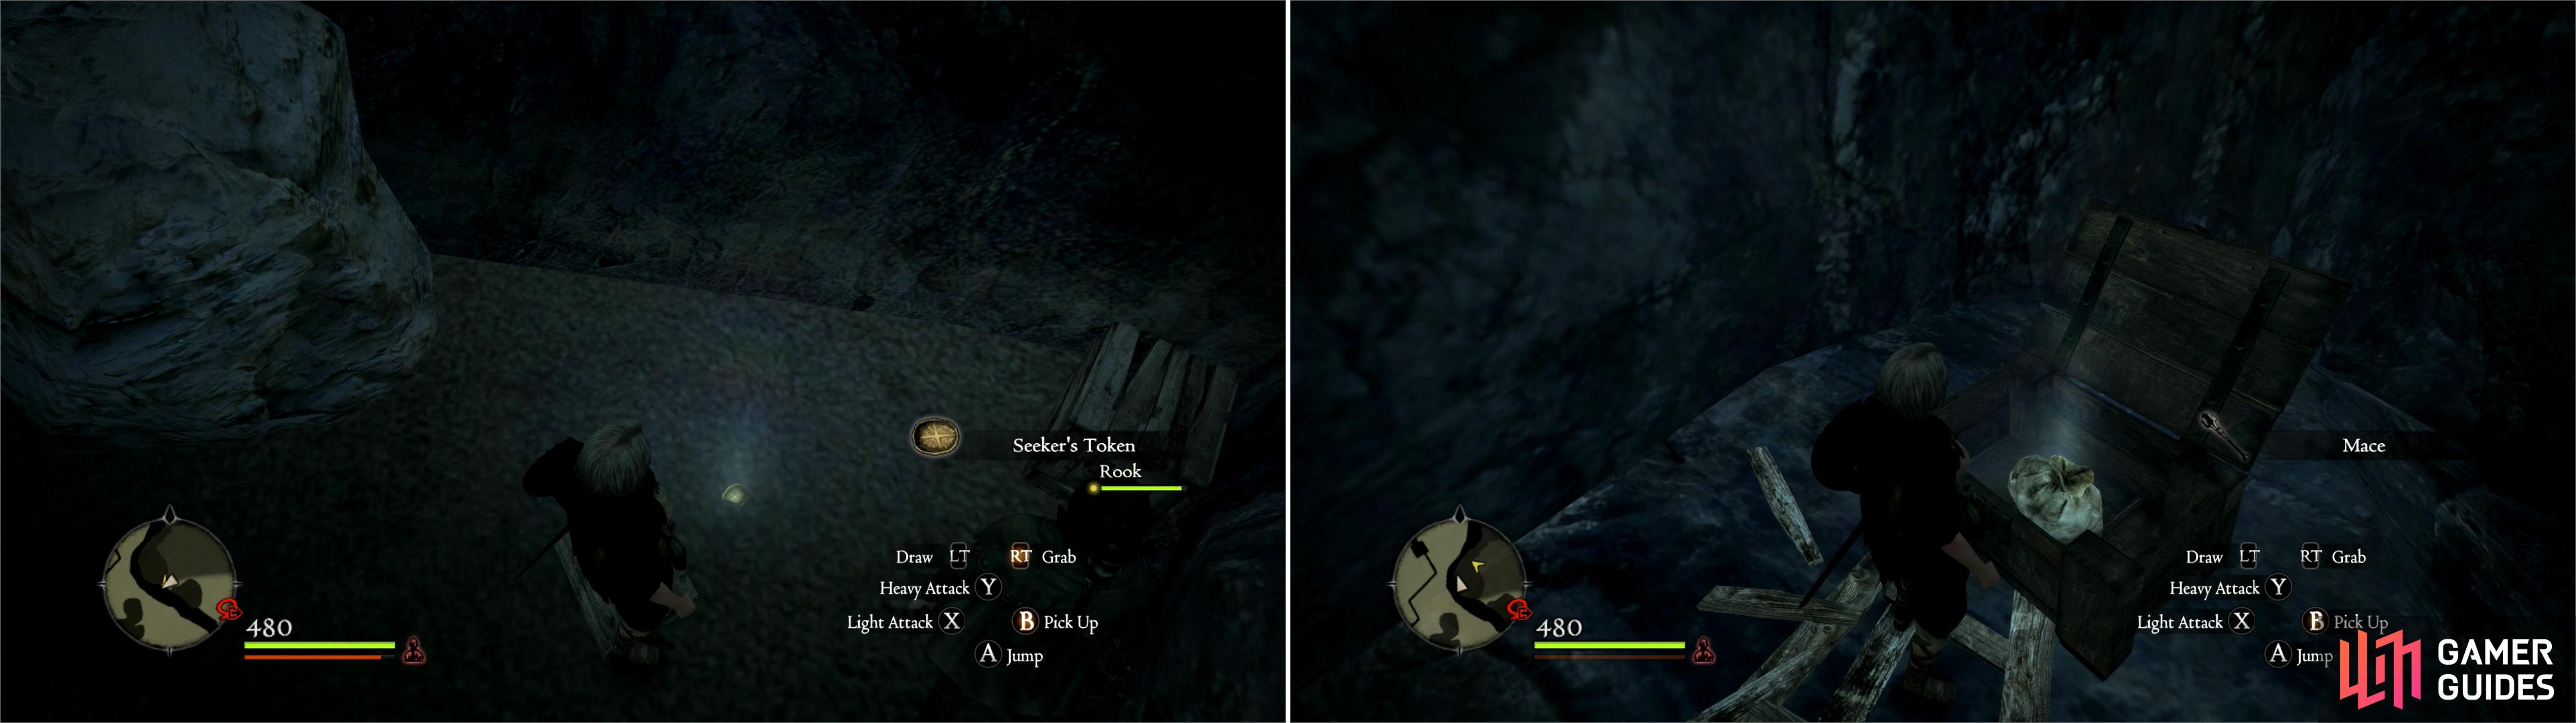 Further along the shore you can find some more treasure, including some Seeker’s Tokens (left). Scale the nearby rocks to find some treasure chests containing some welcome loot (right).